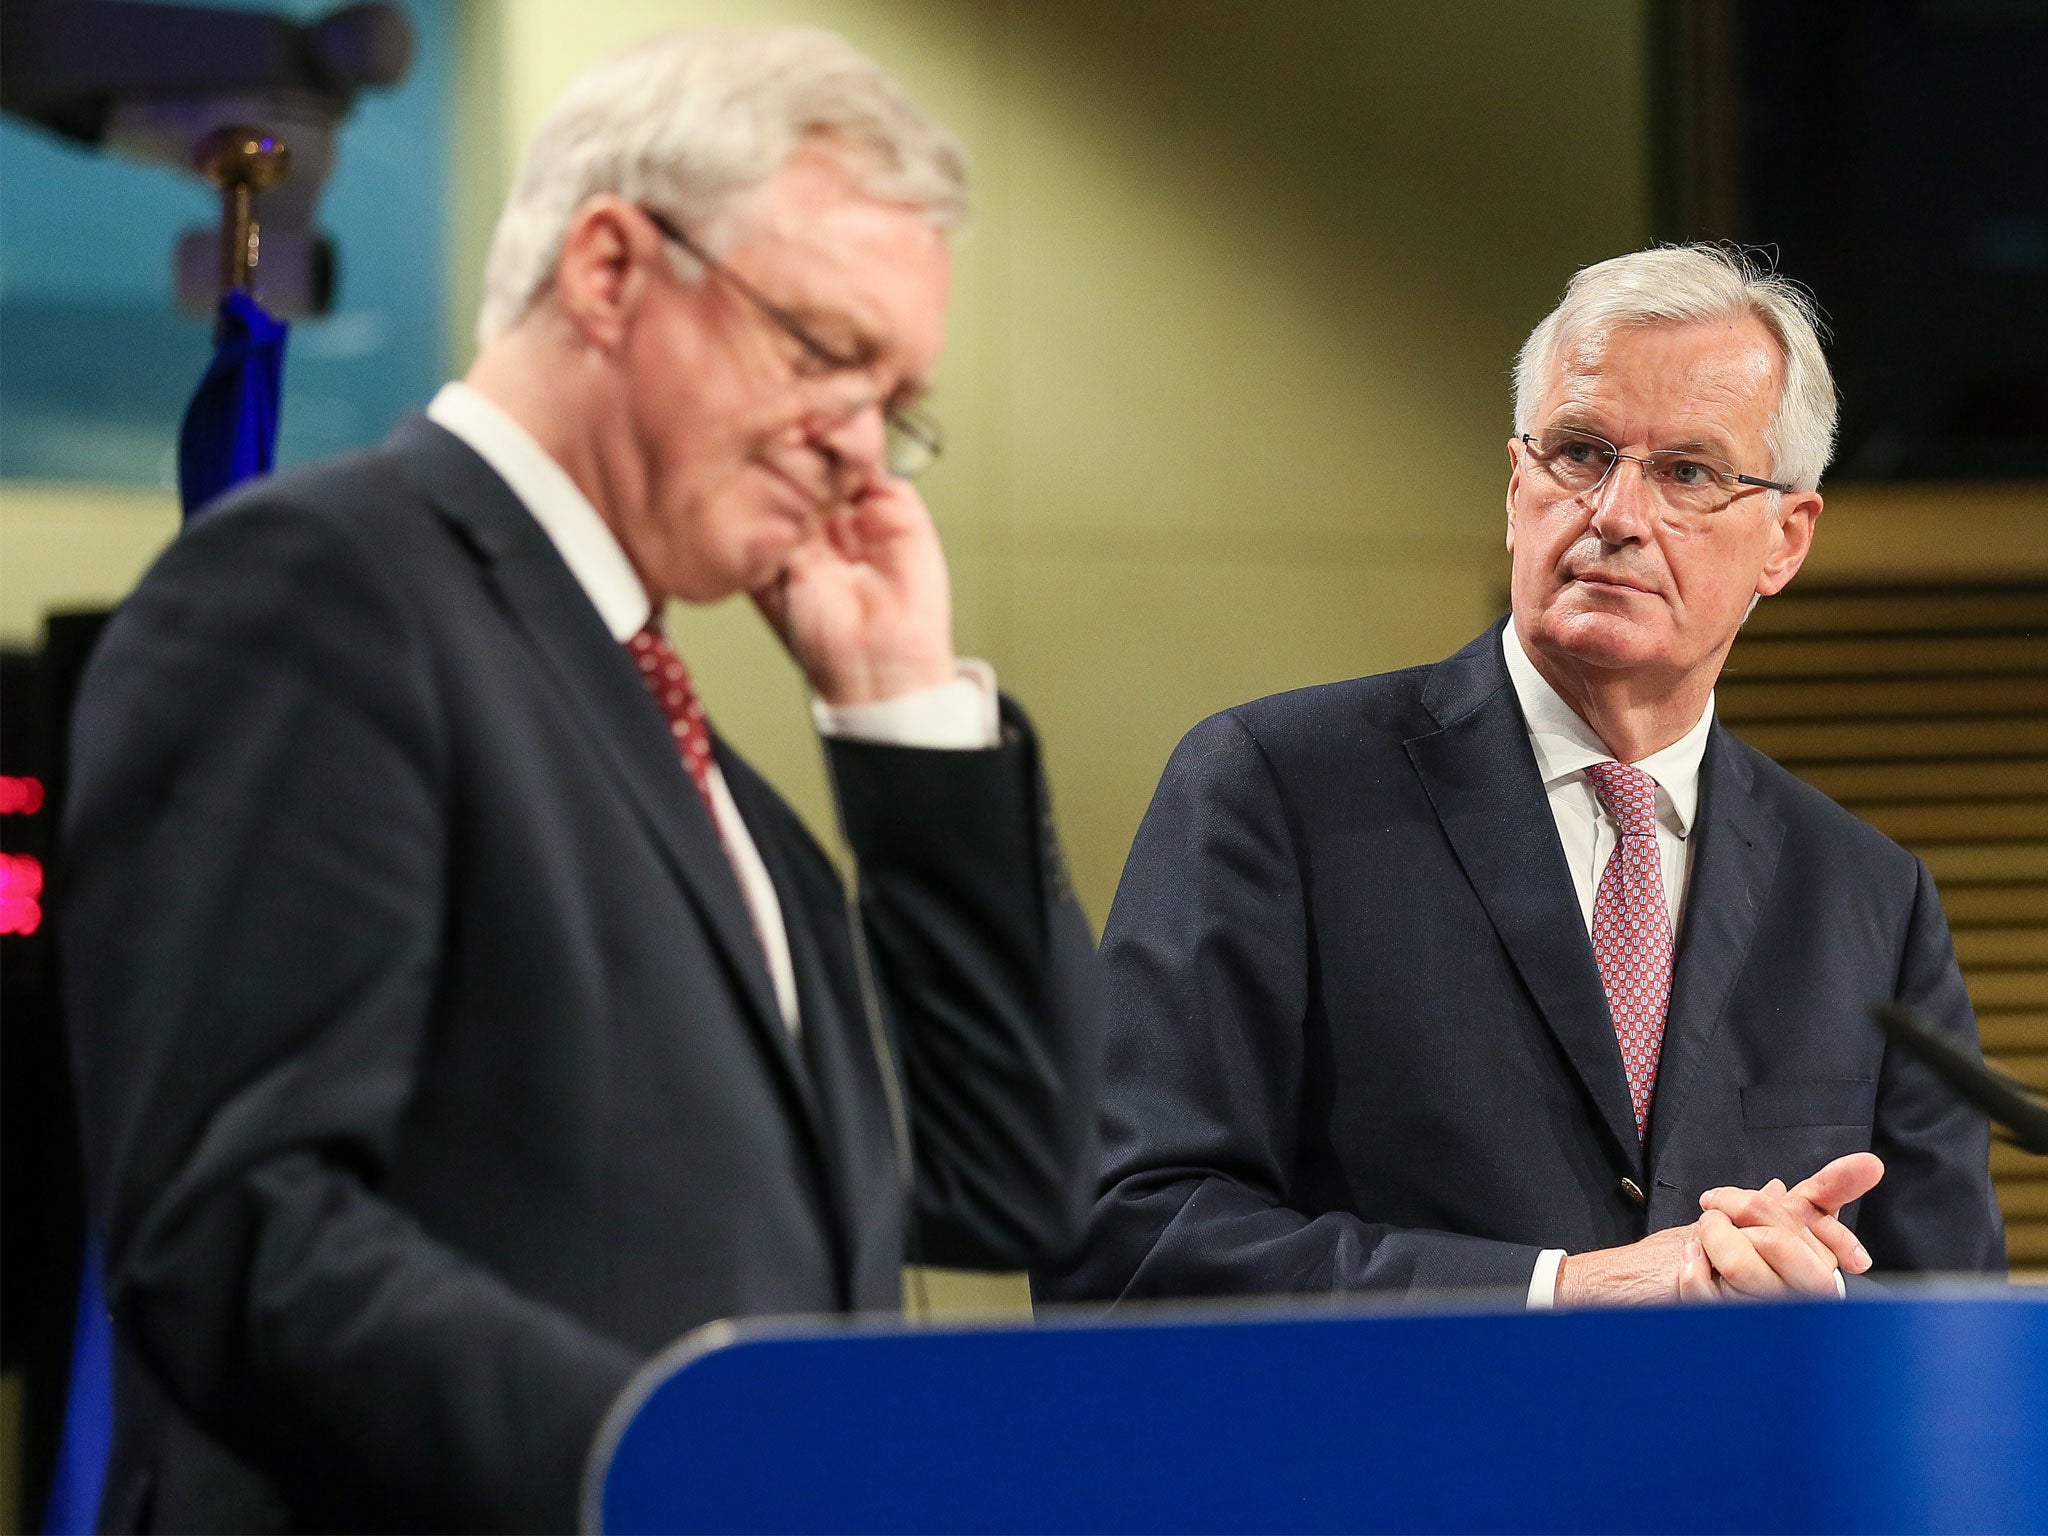 David Davis and Michel Barnier failed to find common ground on many issues at the end of the second round of Brexit talks